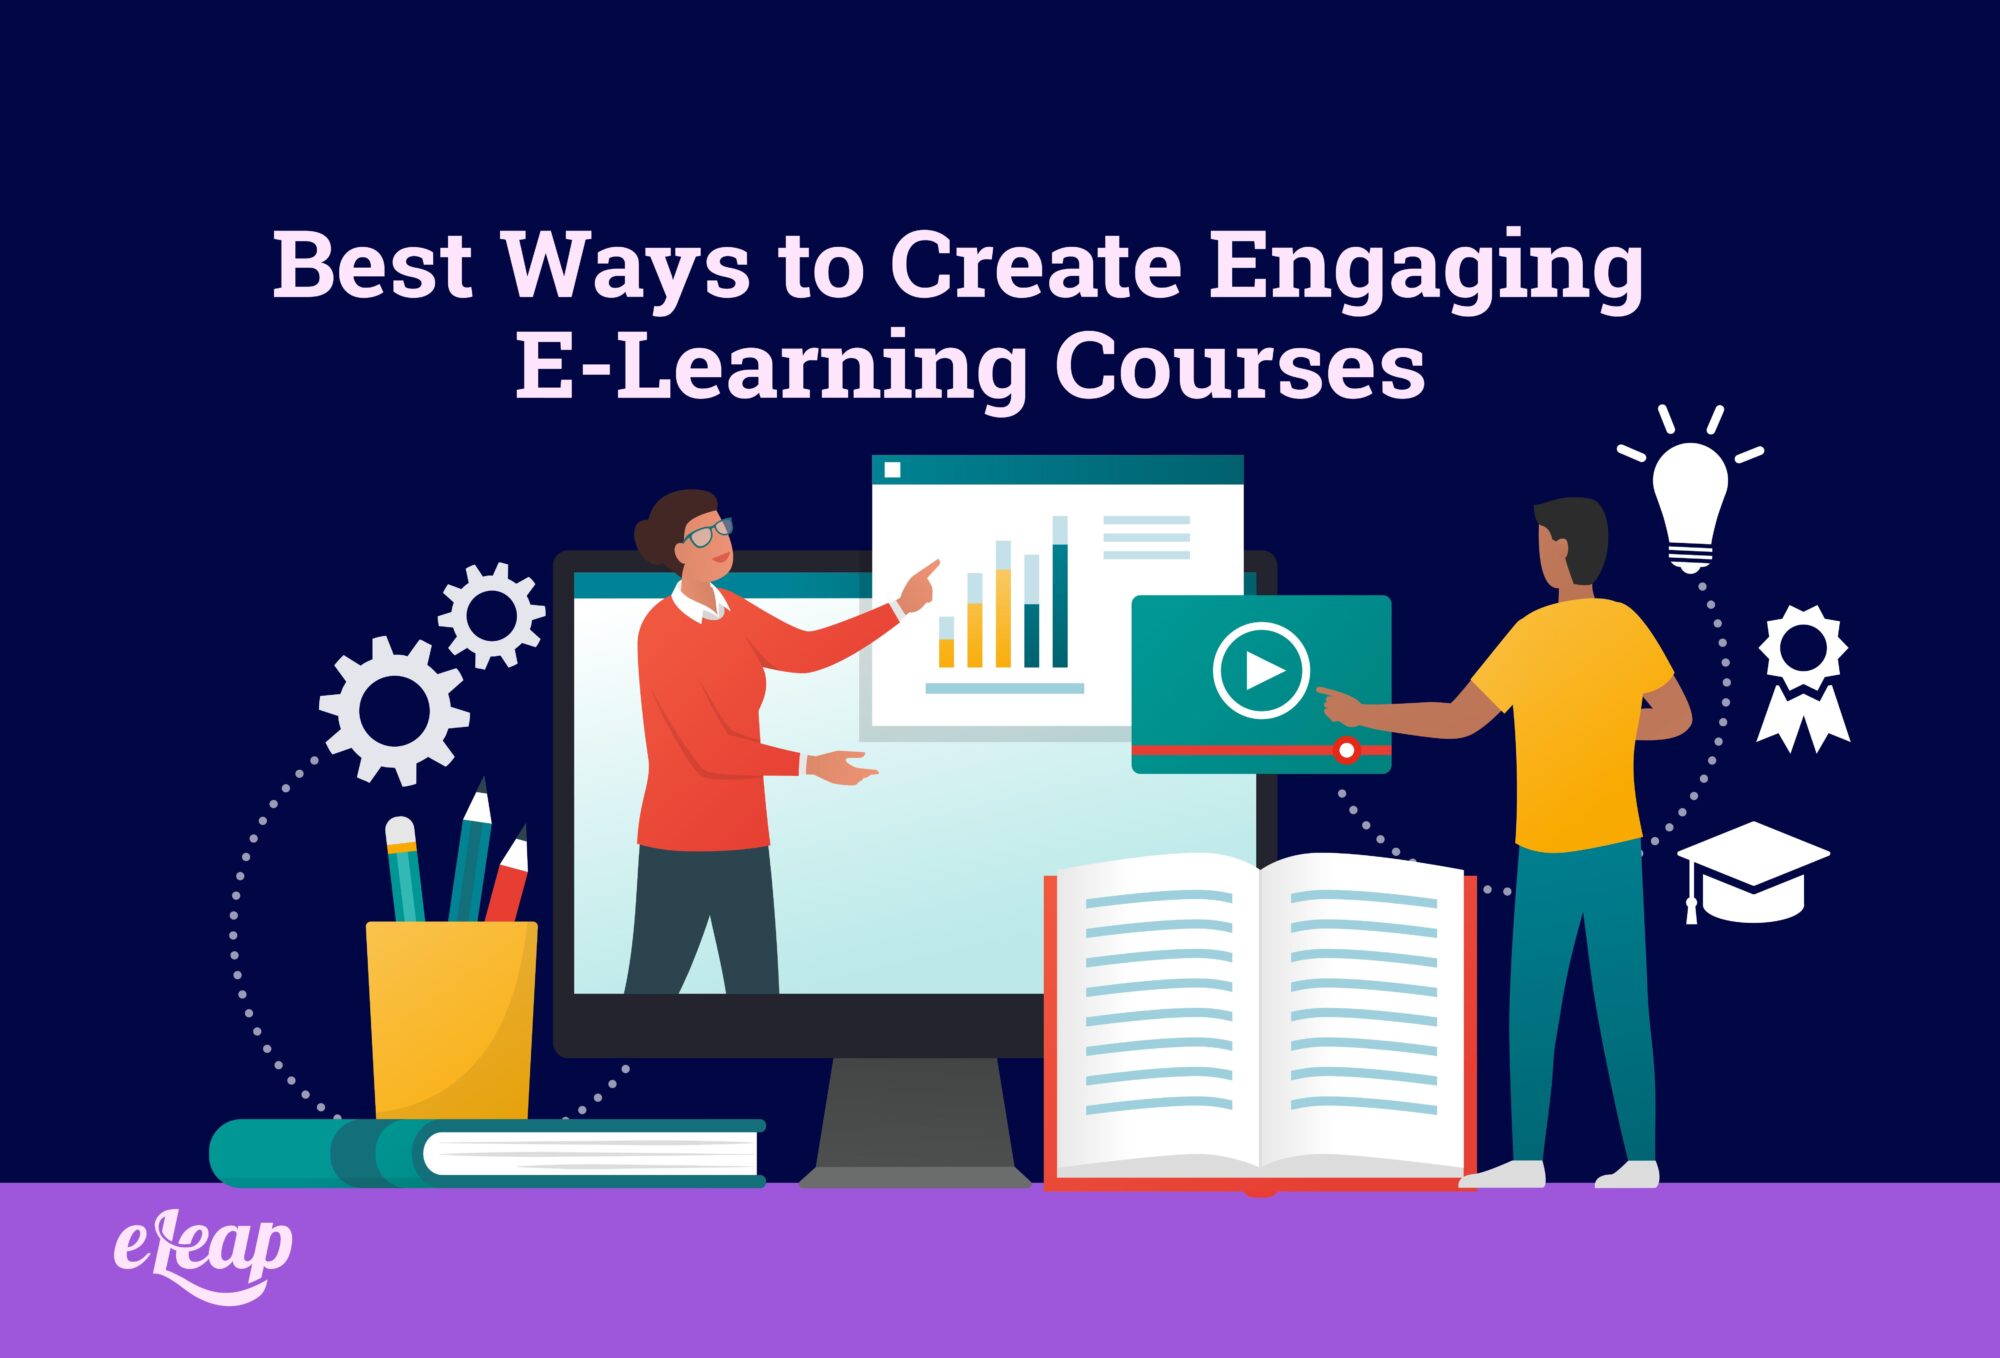 Best Ways to Create Engaging E-Learning Courses